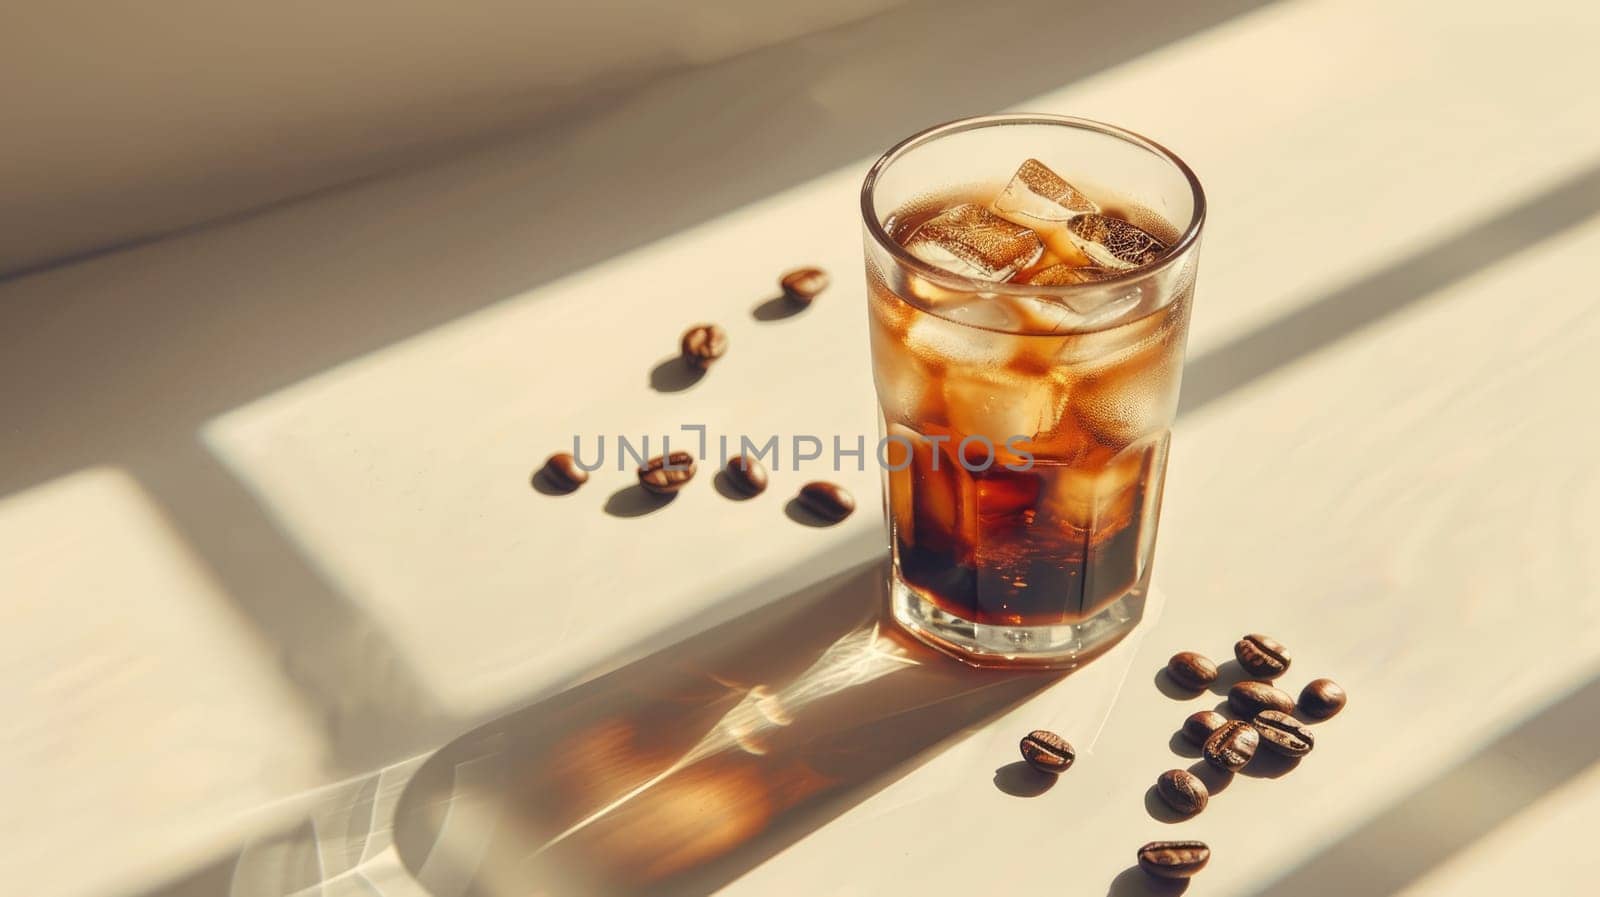 A glass of coffee with ice cubes in it is sitting on a table with coffee beans, Clean composition, Minimal style.